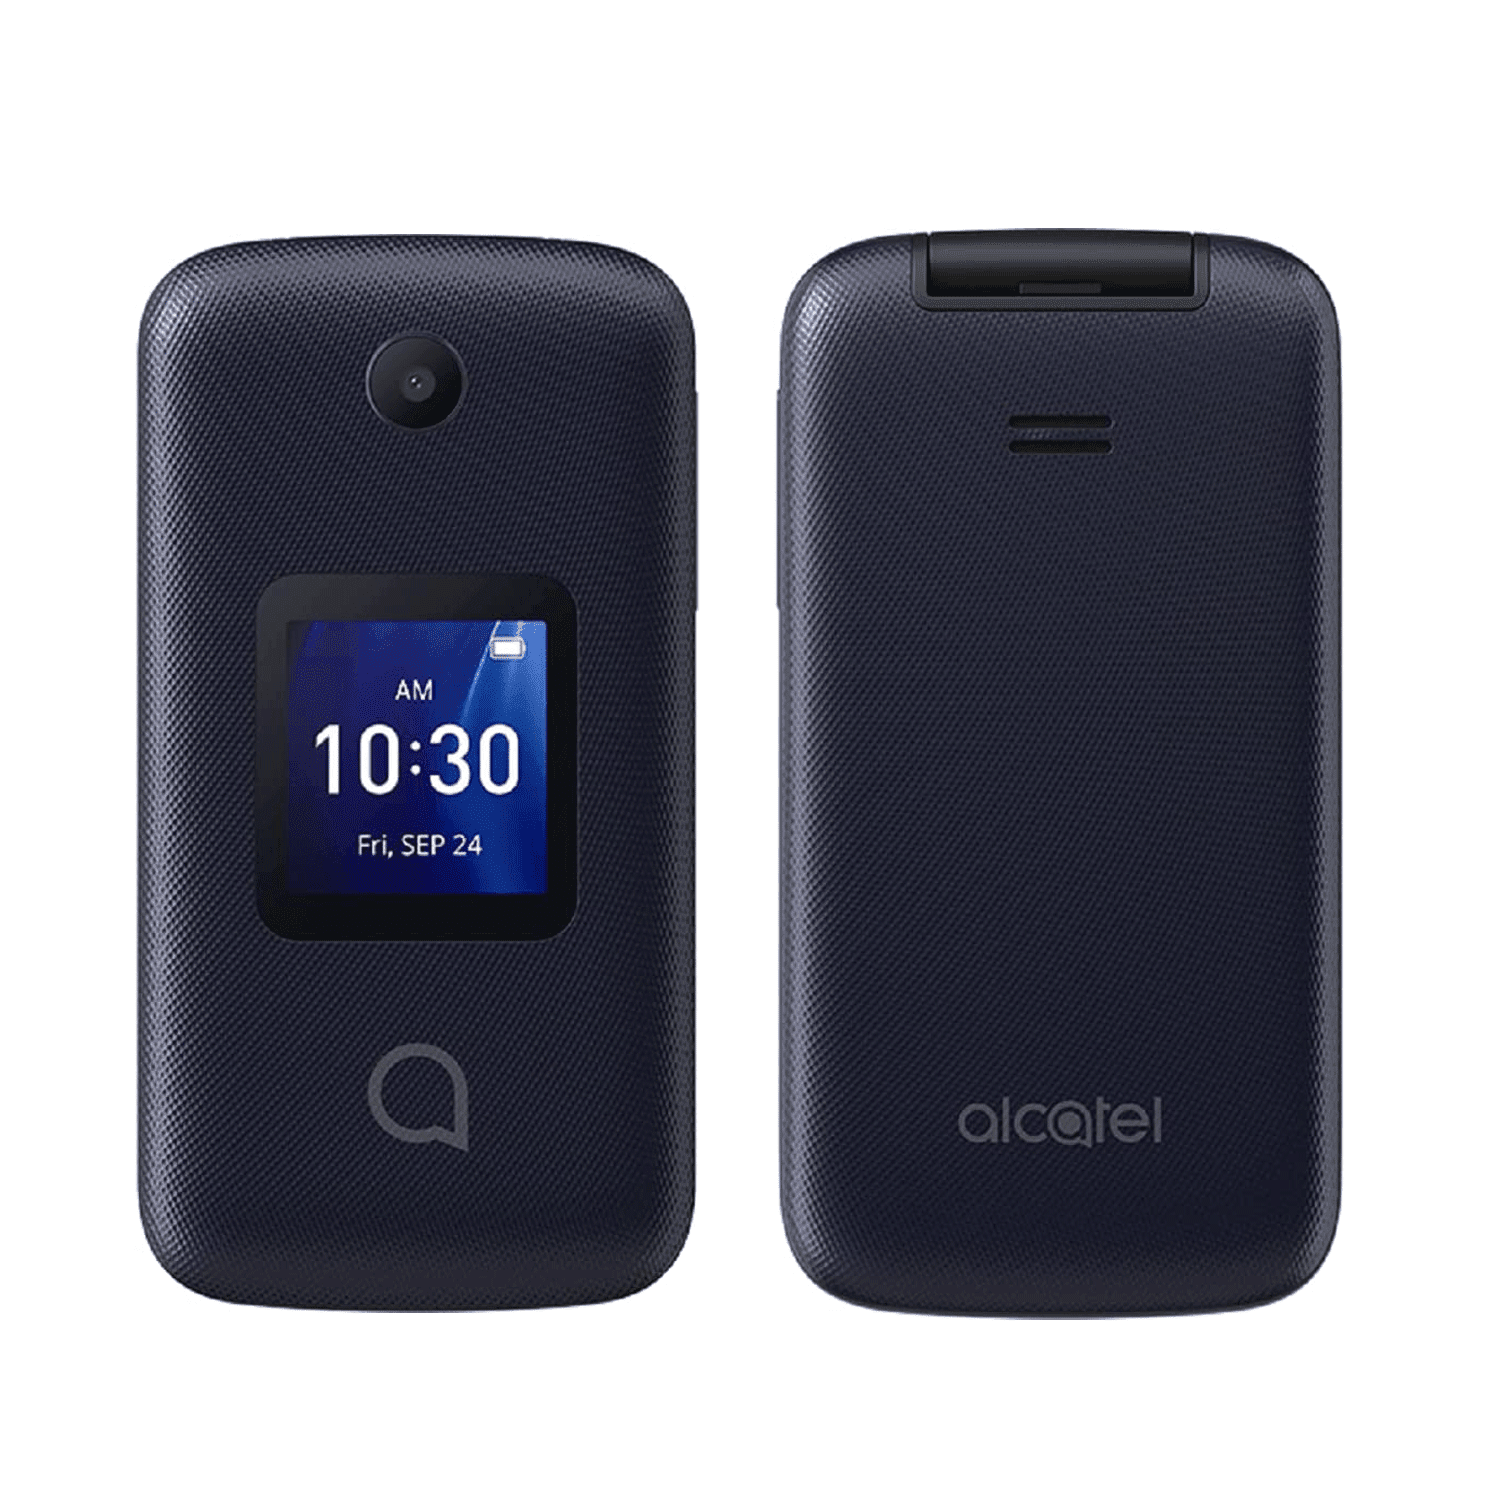 Alcatel GO FLIP 4044 4G LTE (Unlocked for All Carriers) Flip Phone for  Seniors Big Buttons Easy to Use - Black